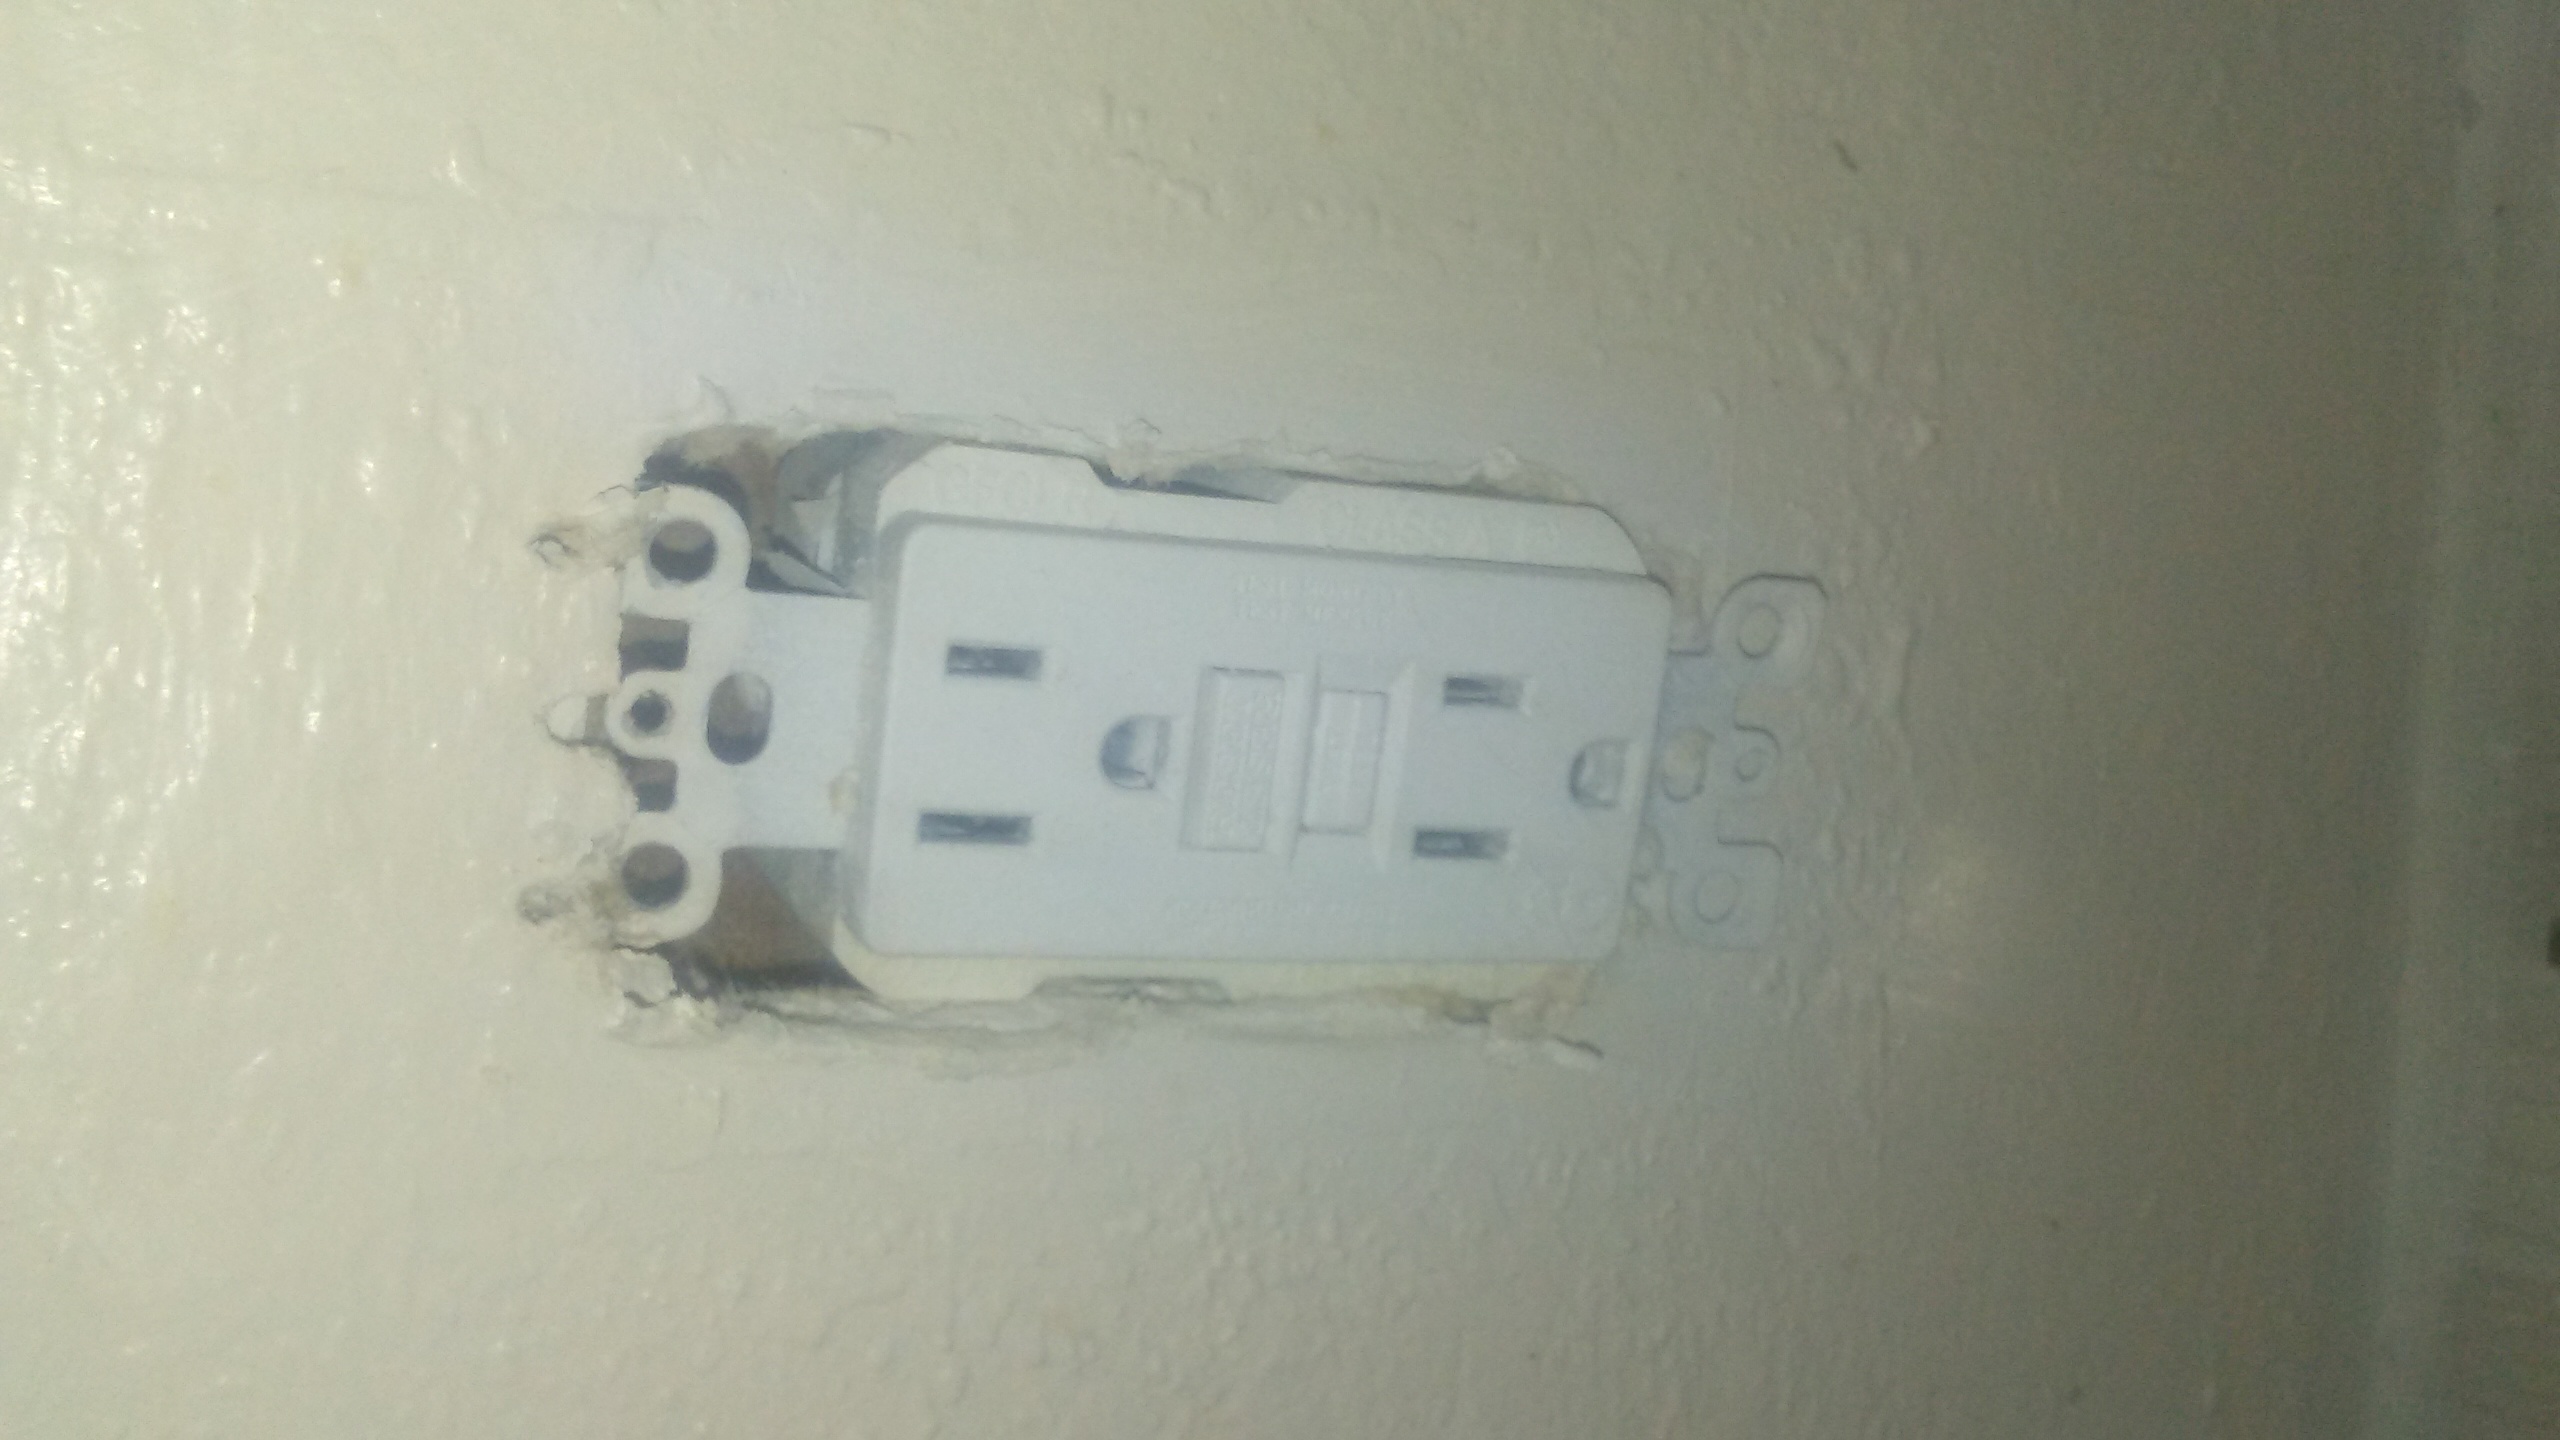 No covers on most of the outlets 